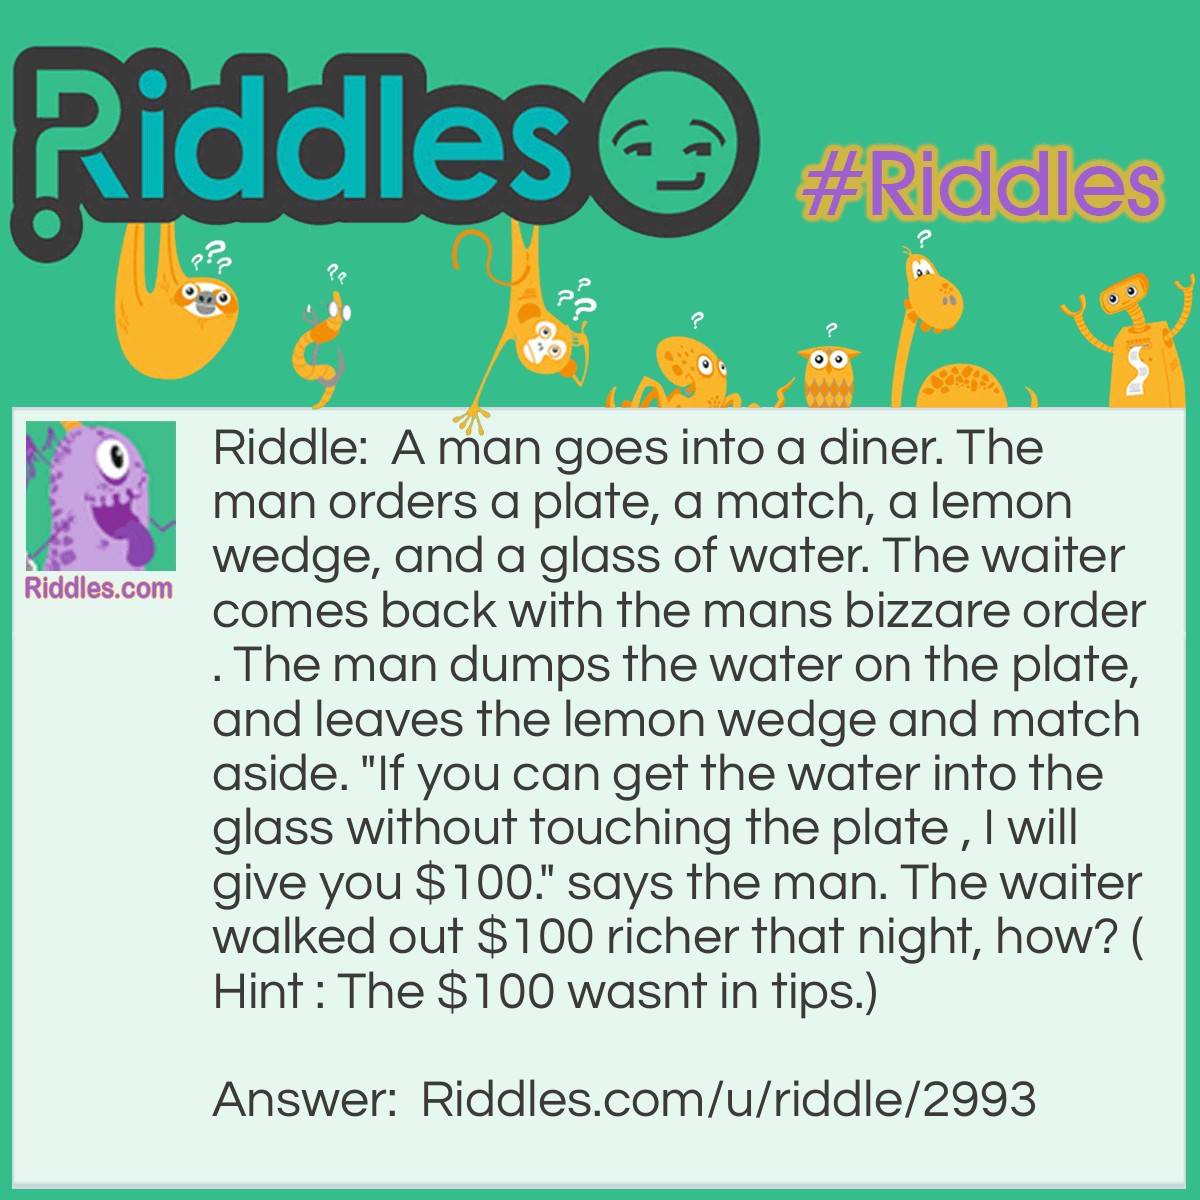 Riddle: A man goes into a diner. The man orders a plate, a match, a lemon wedge, and a glass of water. The waiter comes back with the mans bizzare order. The man dumps the water on the plate, and leaves the lemon wedge and match aside. "If you can get the water into the glass without touching the plate , I will give you $100." says the man. The waiter walked out $100 richer that night, how? (Hint : The $100 wasnt in tips.) Answer: The waiter light the match, then stuck it in the lemon wedge, putting the glass on top so the water evaporated.